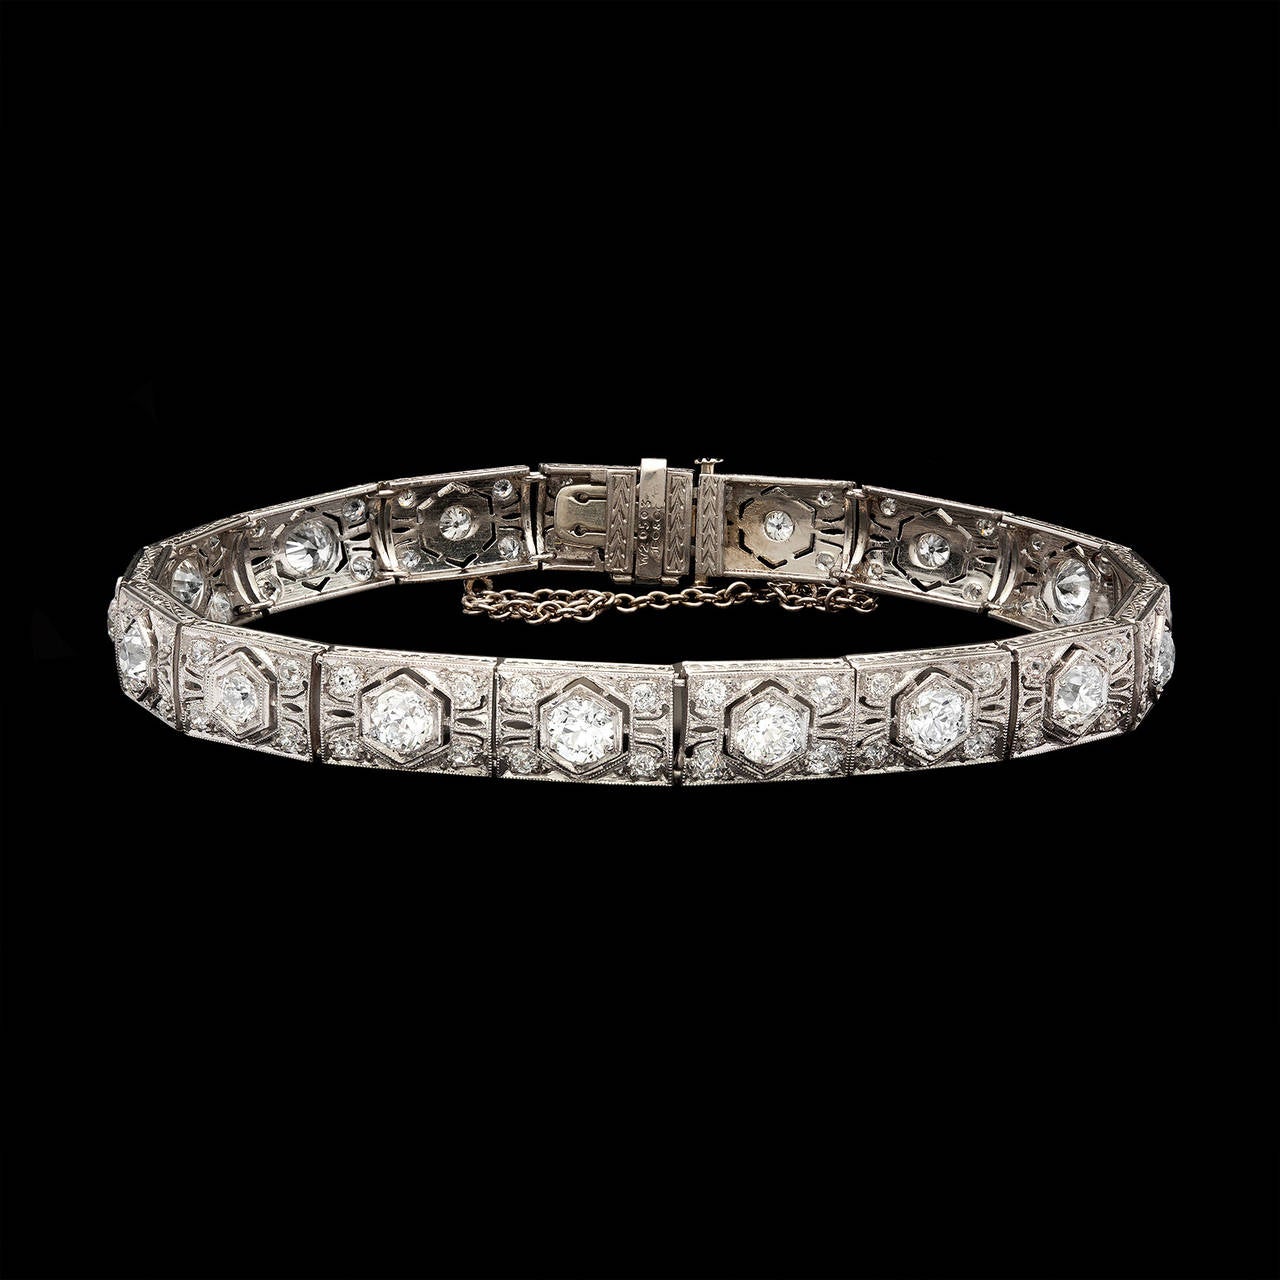 Art Deco J.E. Caldwell Platinum Bracelet Features 17 Old European Cut Diamonds of 4.50cts on Beautifully Crafted Links with Milgrain and Filigree Details. The main stones are enhanced by another 68 diamonds weighing 1.40cts. The bracelet is 8.25